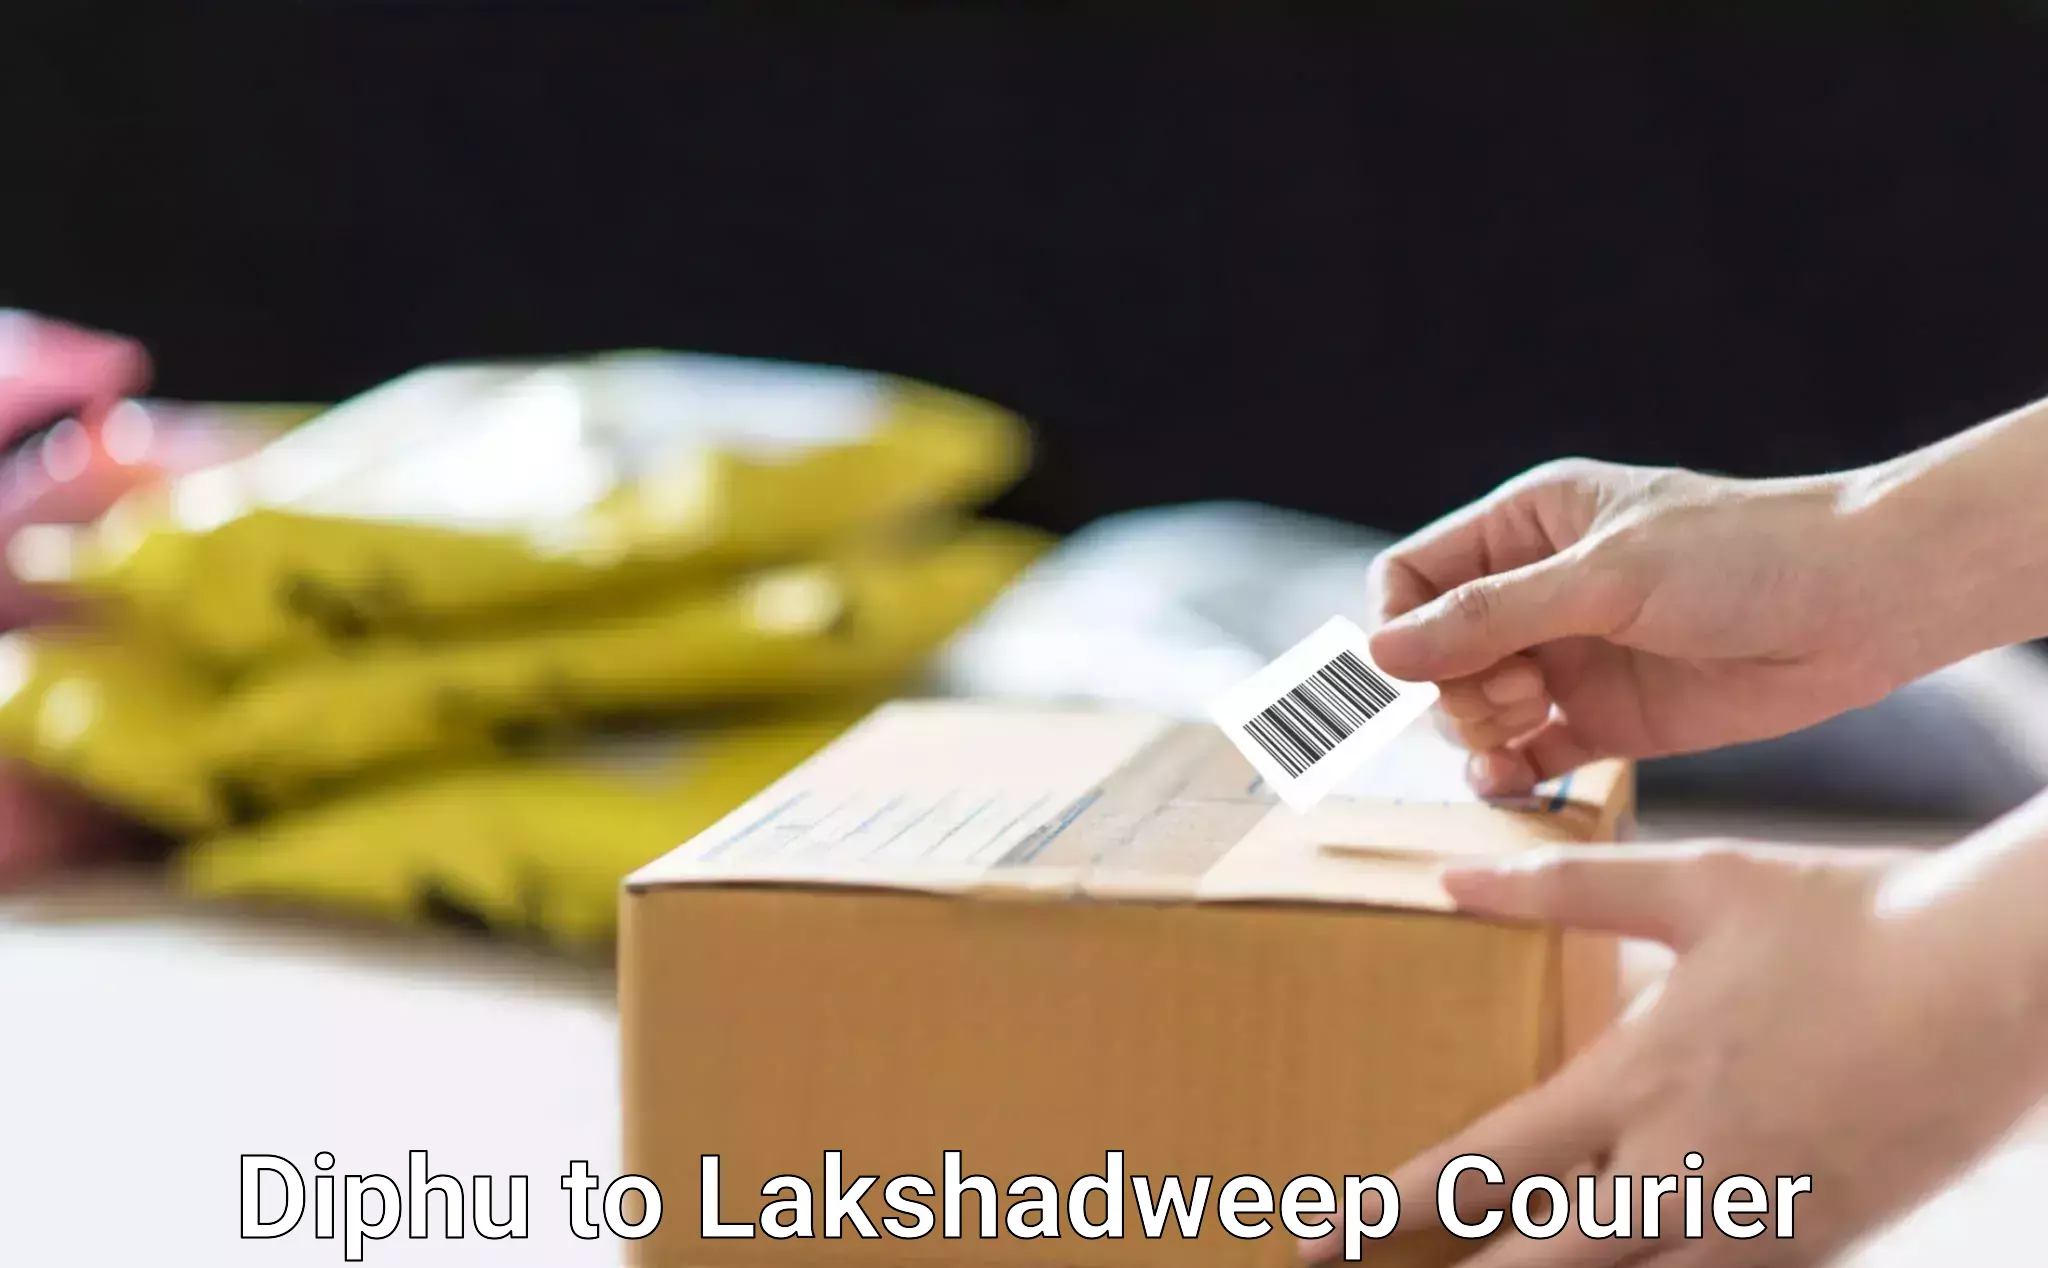 Courier dispatch services Diphu to Lakshadweep